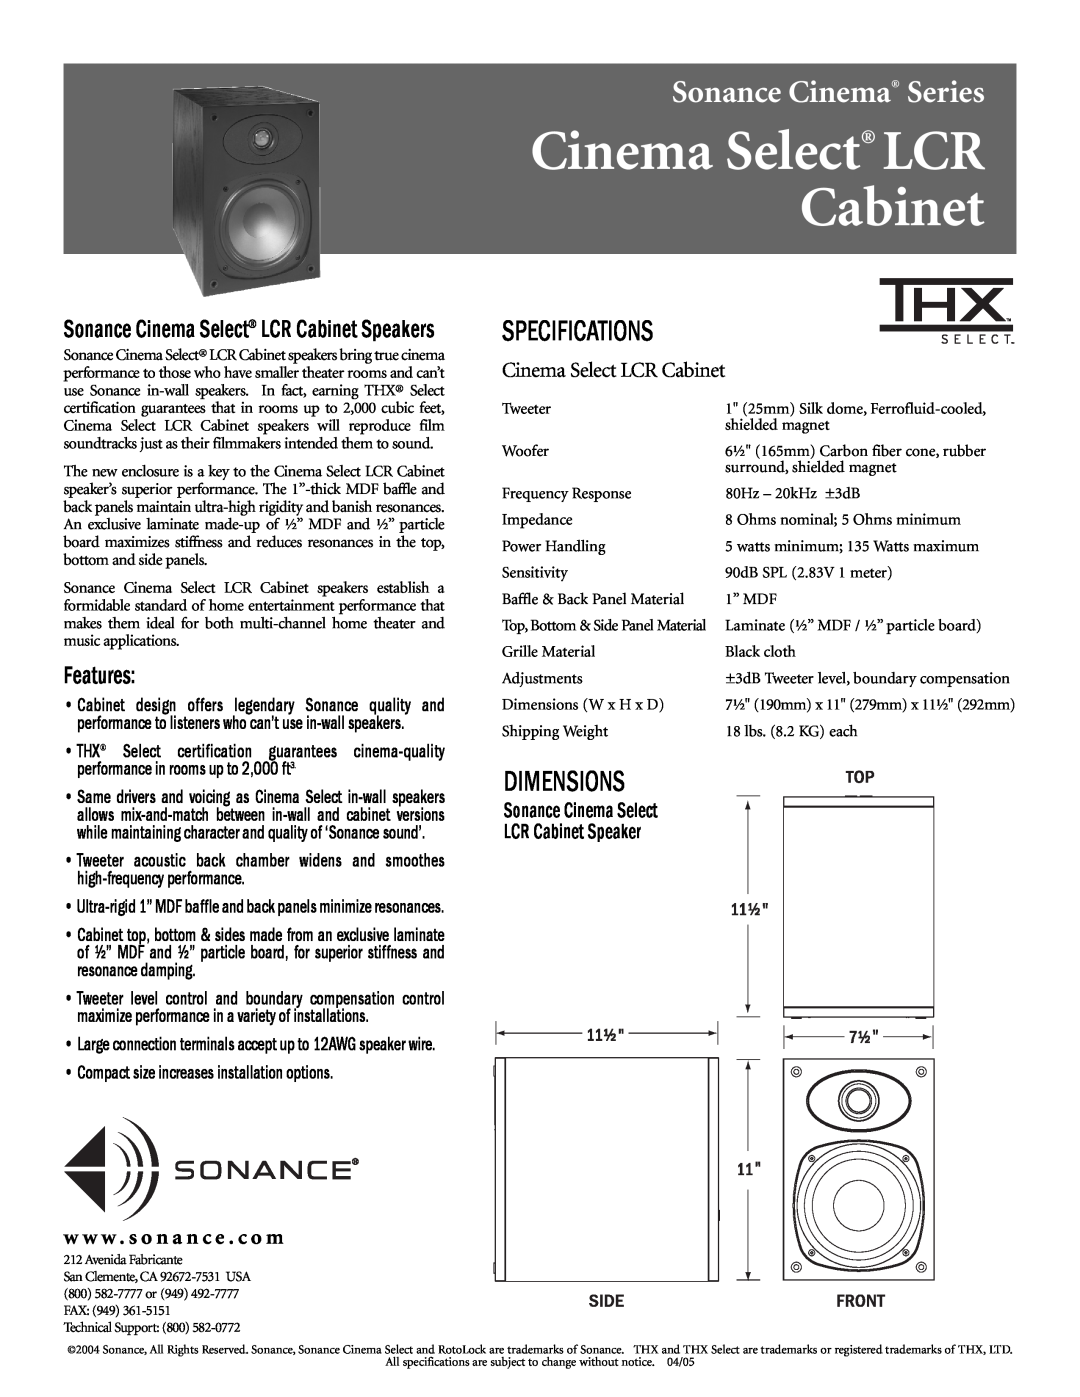 Sonance LCR Speaker specifications Cinema Select LCR Cabinet, Sonance Cinema Series, Specifications, Dimensions, Features 